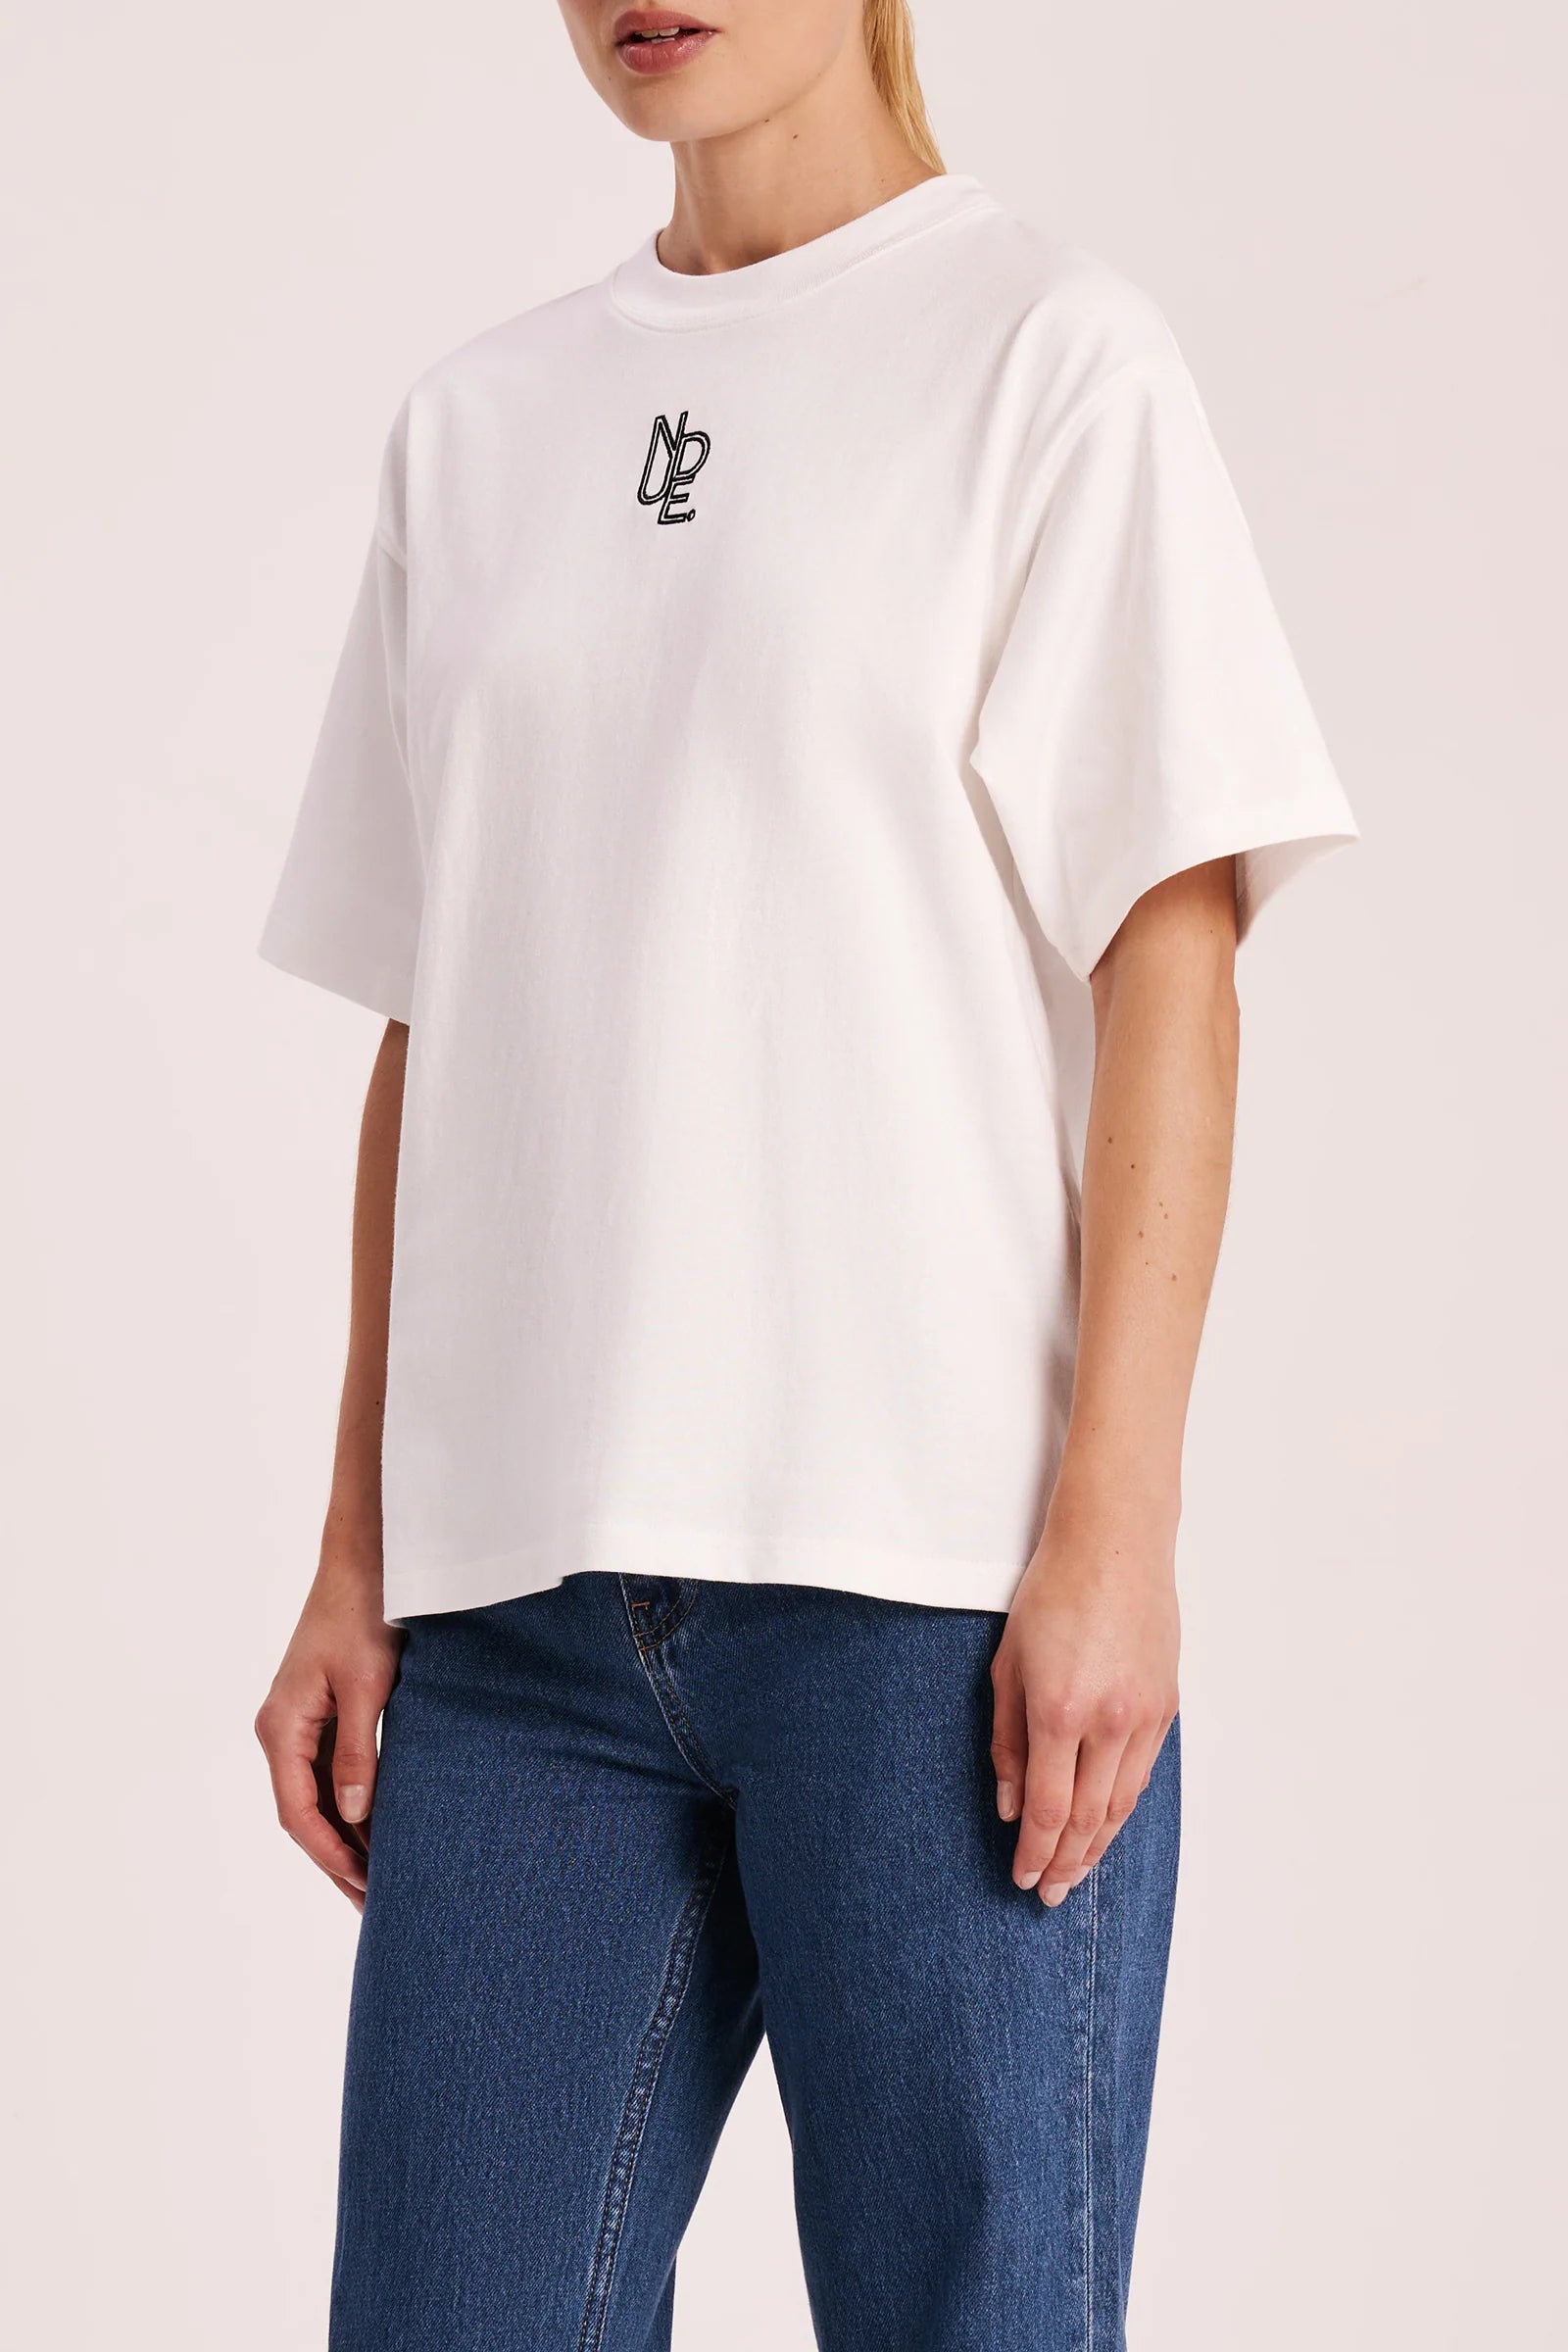 Nude Lucy | Haven Emblem Tee - White